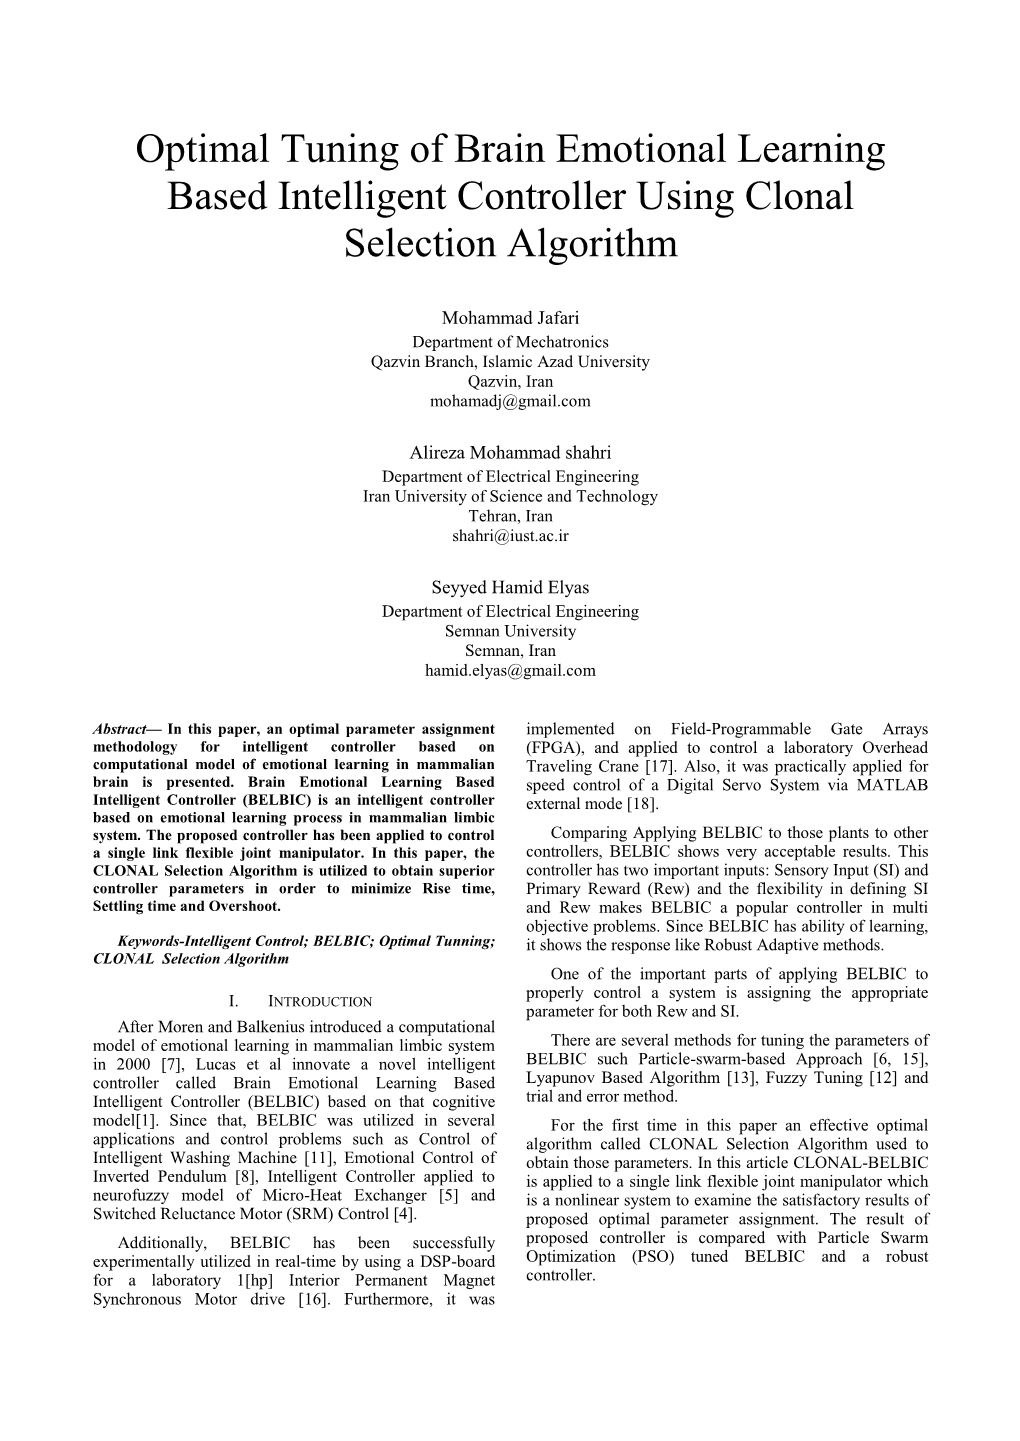 Optimal Tuning of Brain Emotional Learning Based Intelligent Controller Using Clonal Selection Algorithm